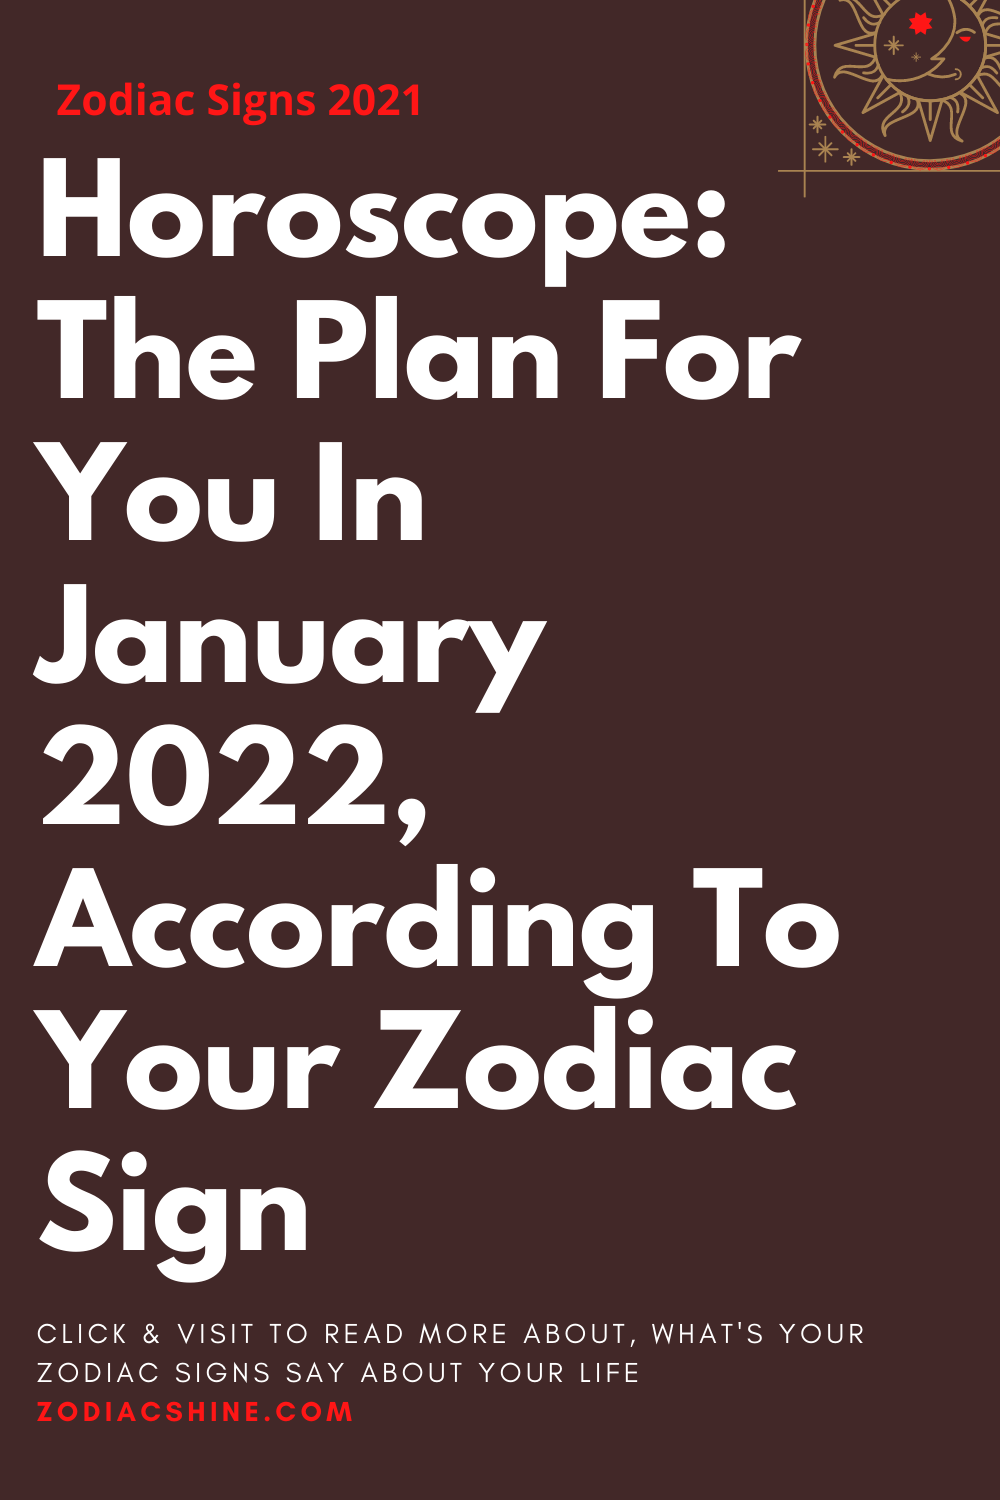 Horoscope: The Plan For You In January 2022 According To Your Zodiac Sign